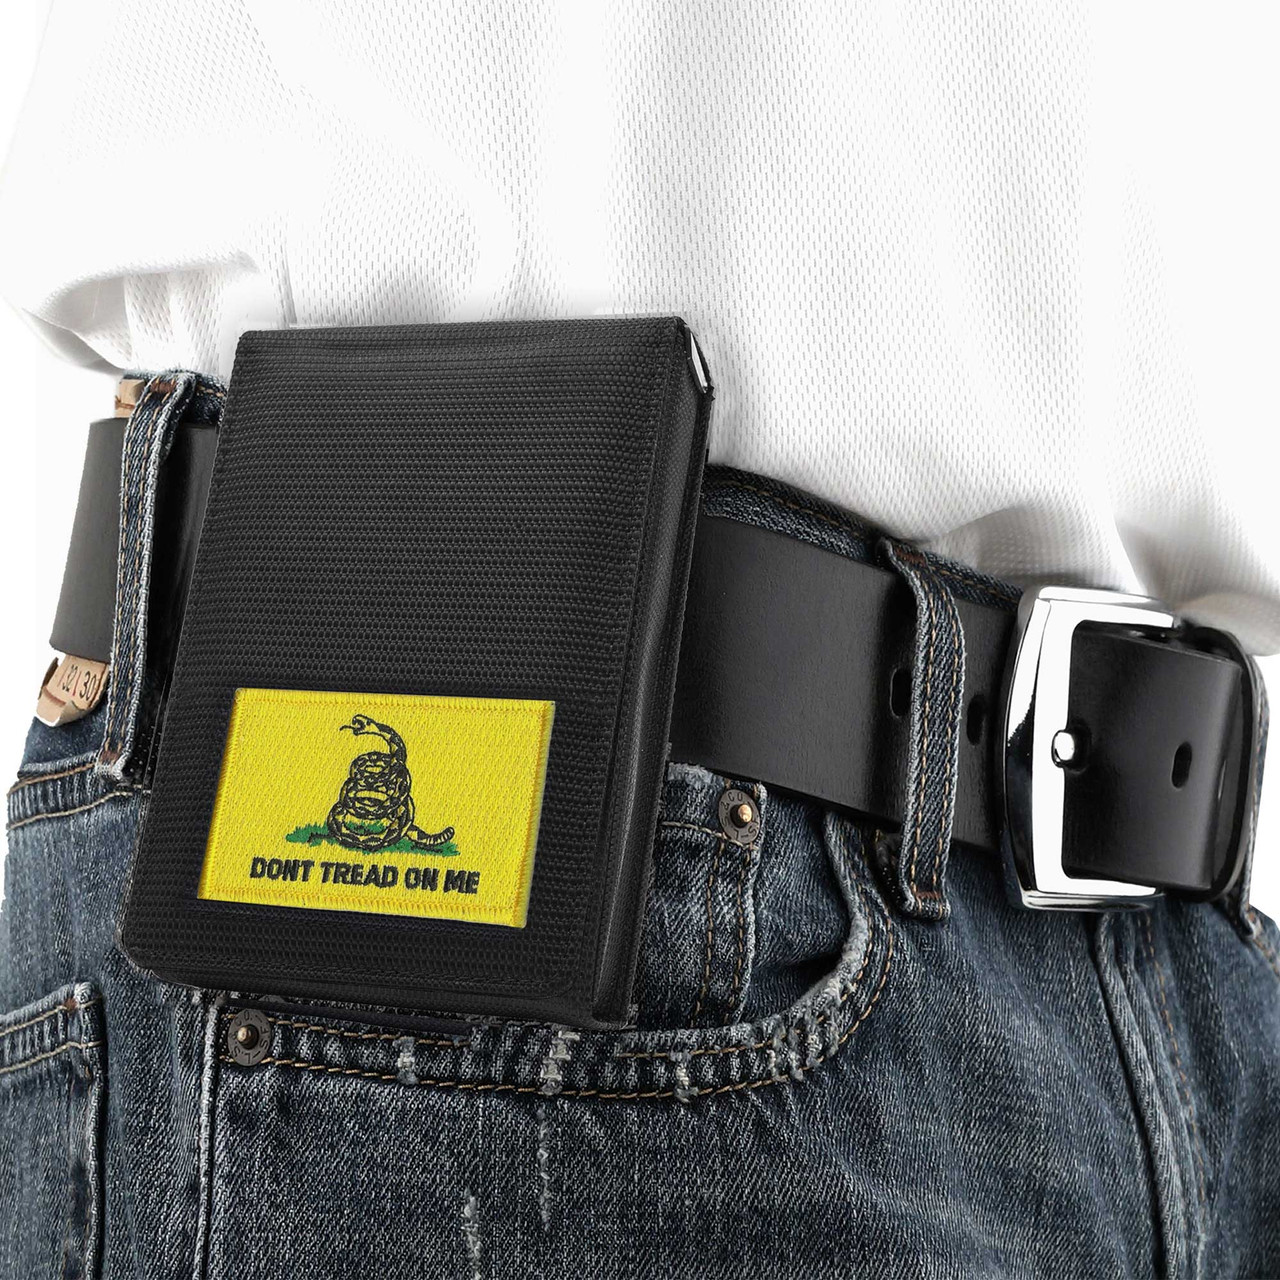 Sig P226 Don't Tread on Me Holster